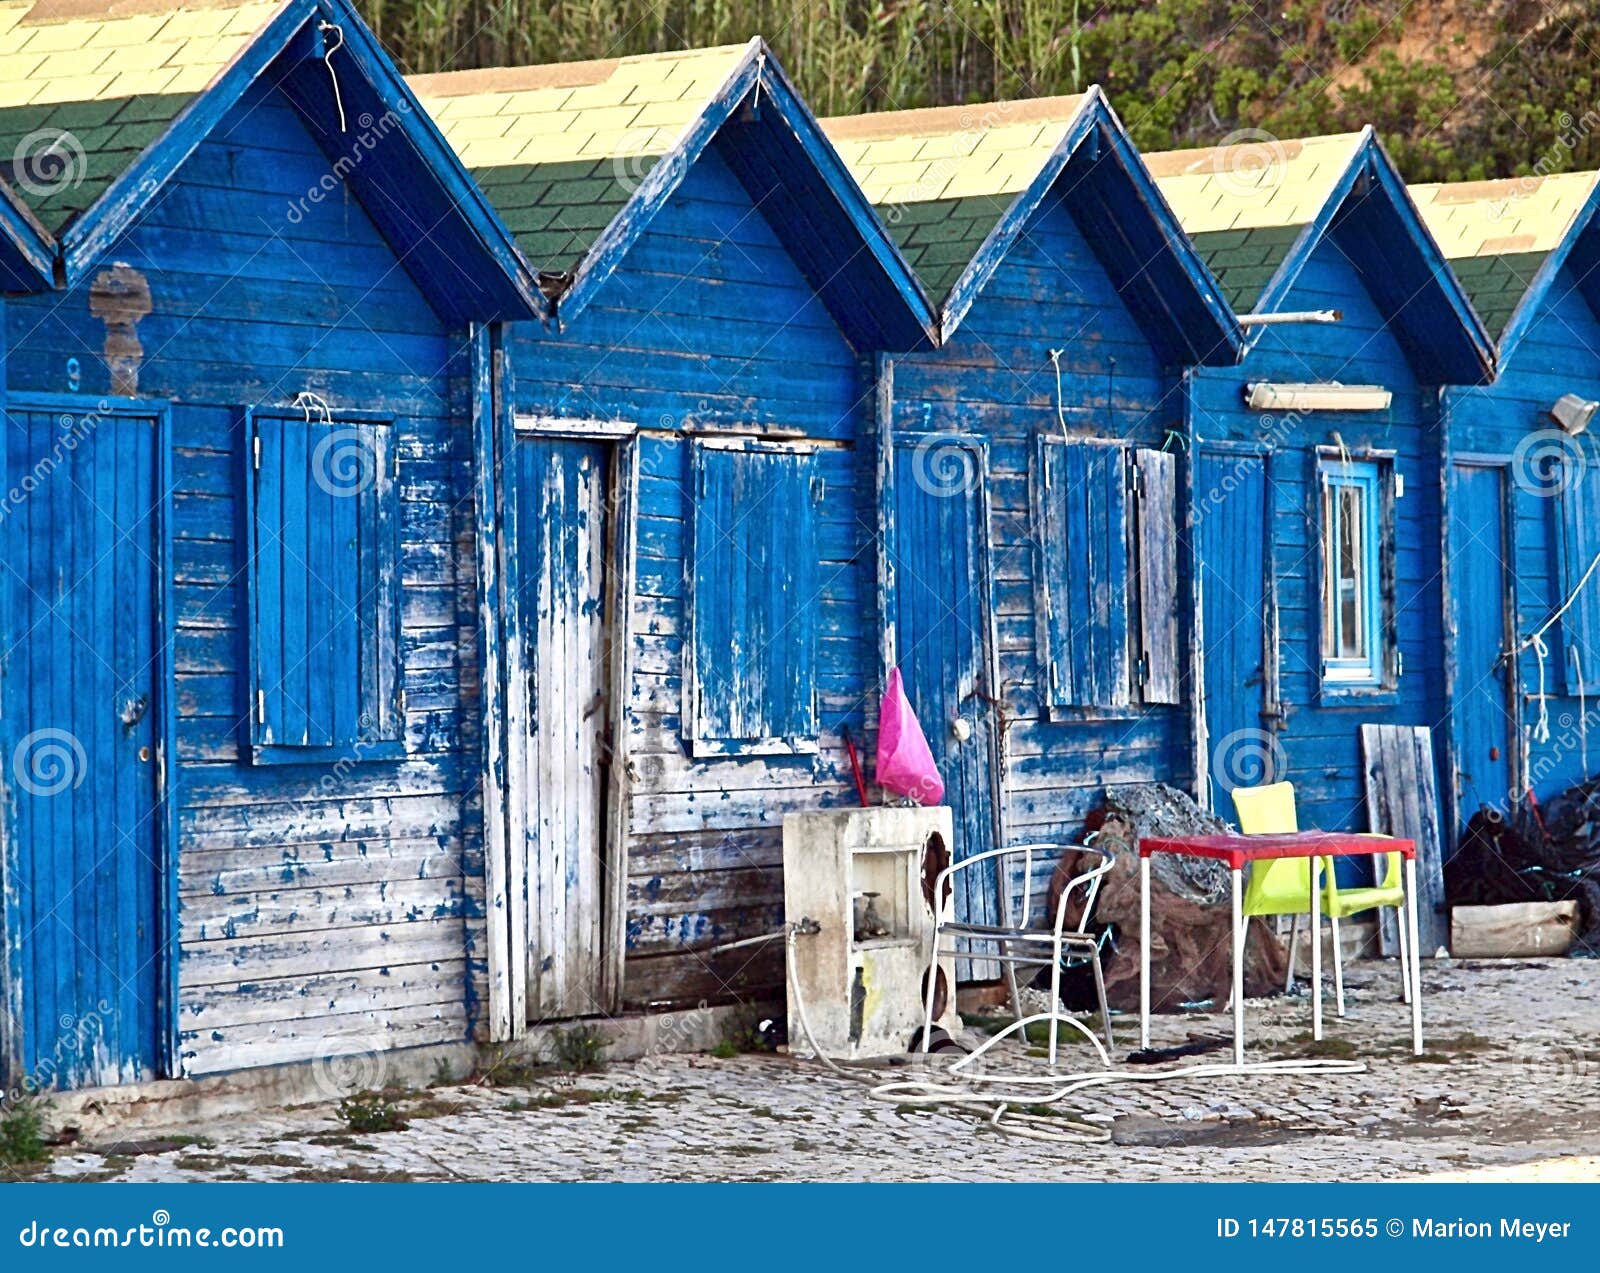 blue wooden fisher houses in olhos de agua in portugal